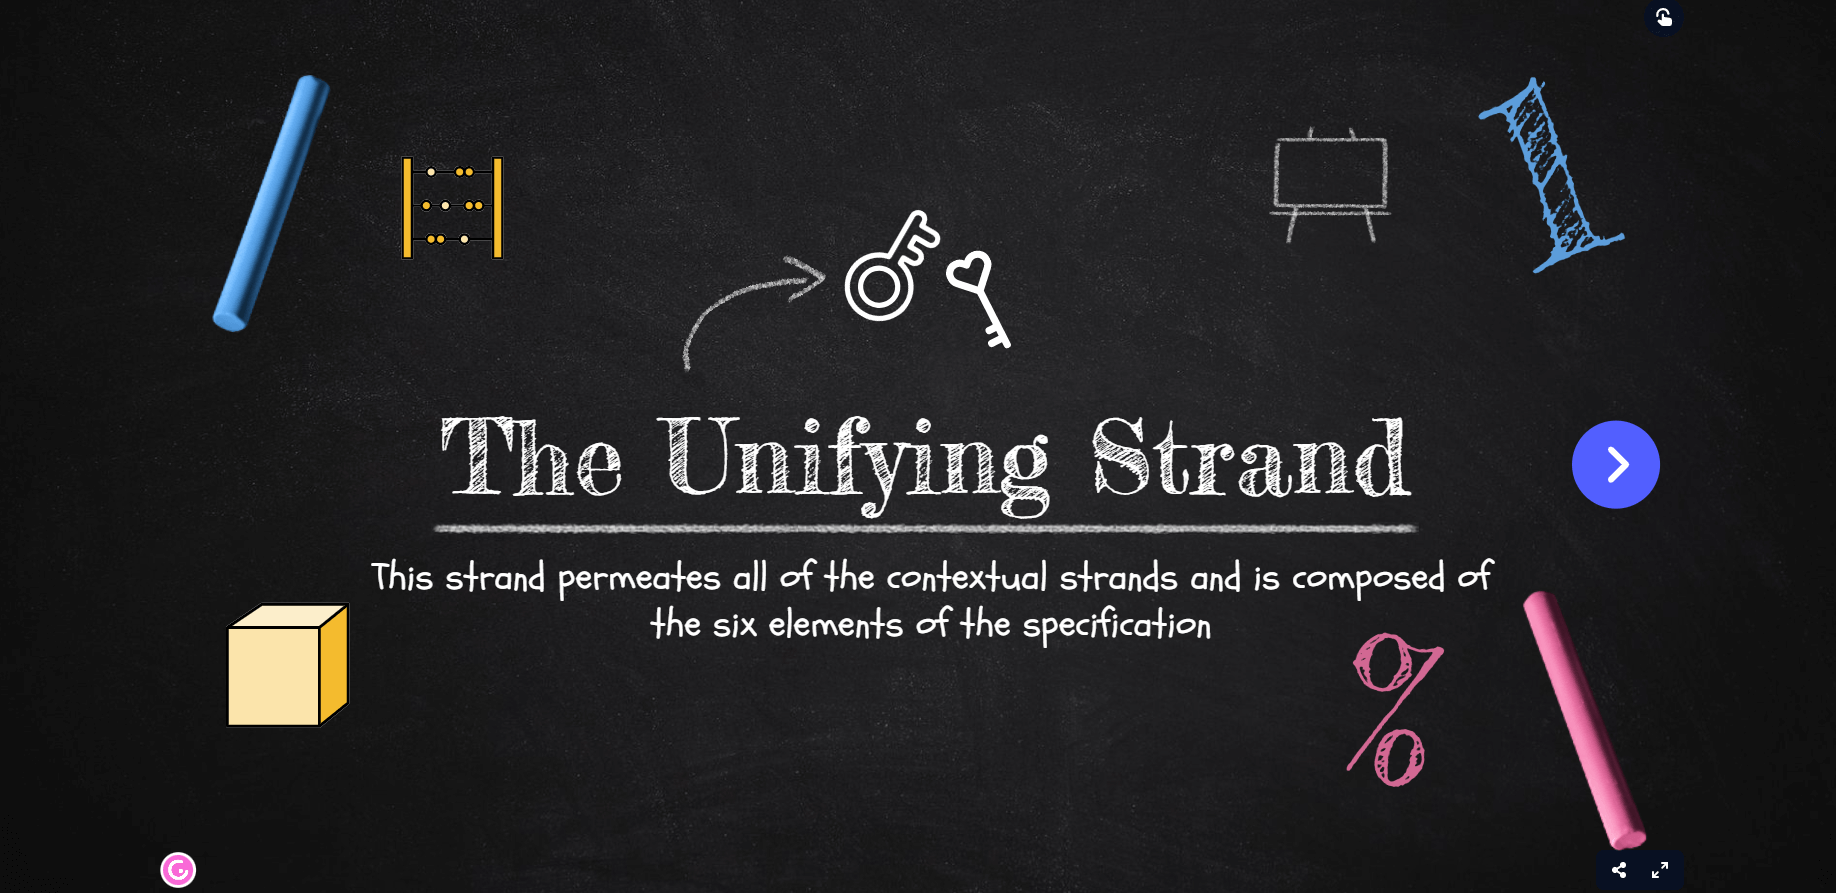 The Unifying Strand